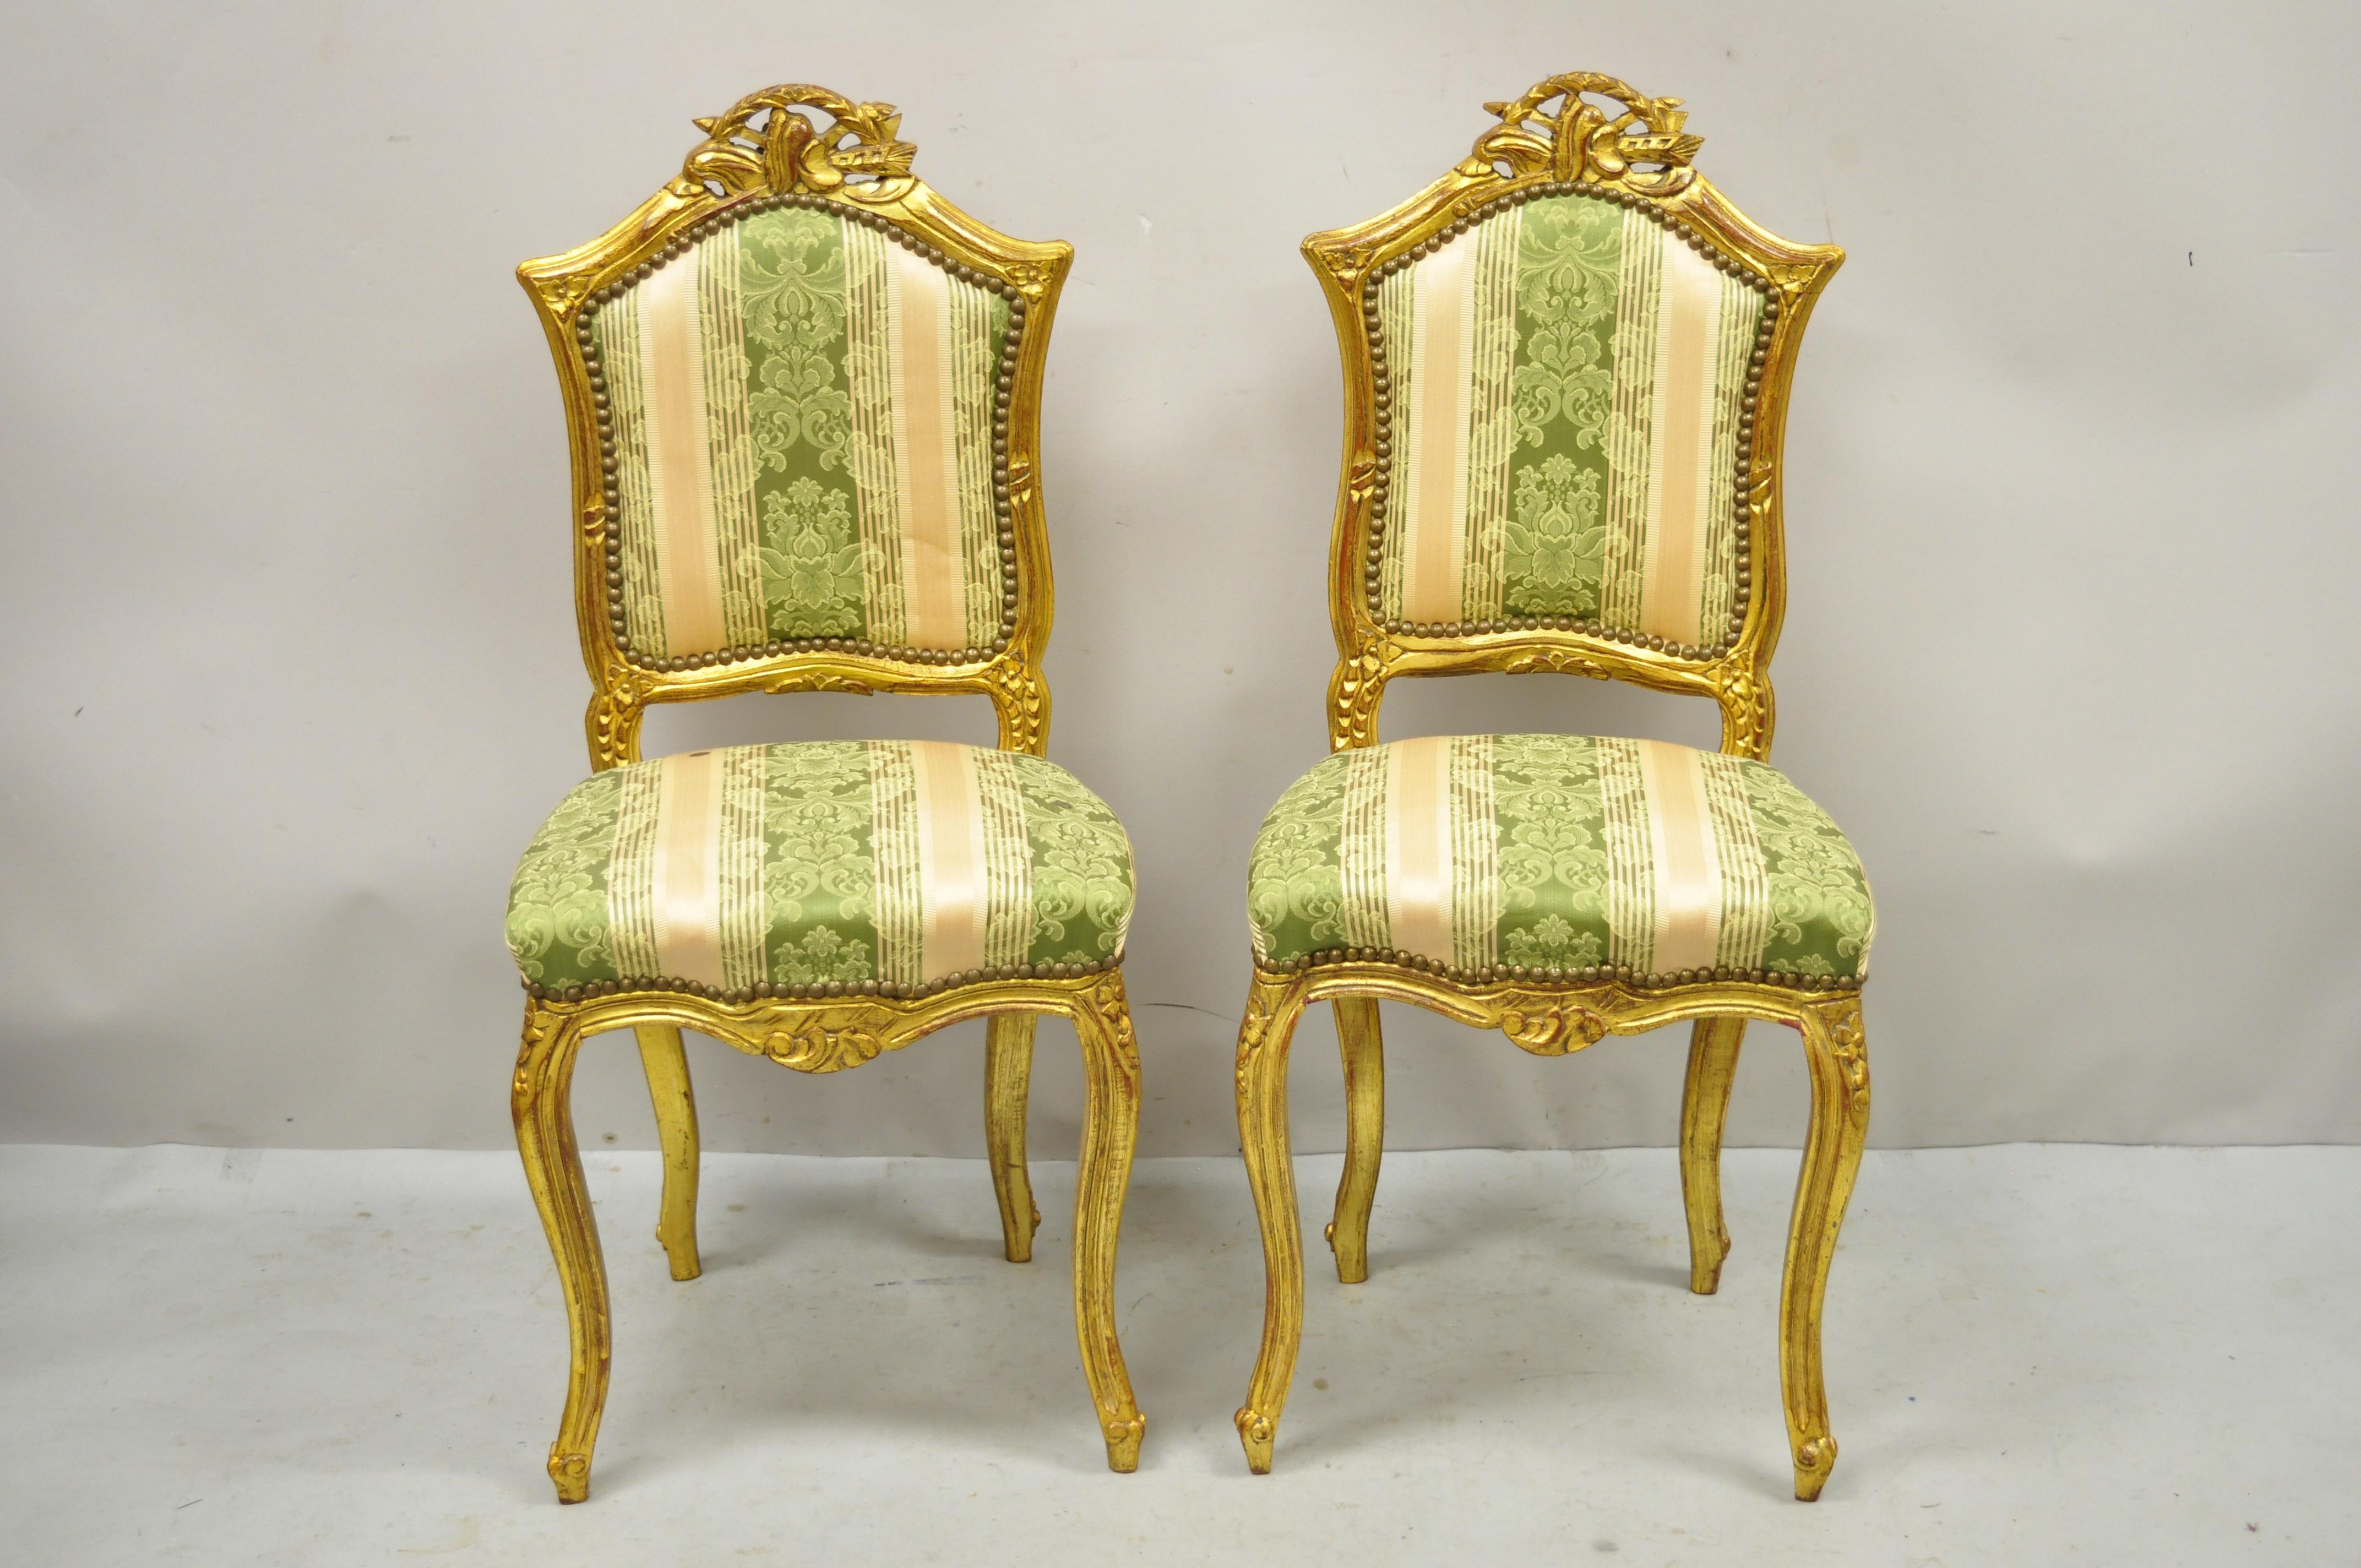 Vintage French Louis XV style goldwood gilt carved boudoir side chairs - a pair. Item features gold gilt finish, solid wood frames, nicely carved details, cabriole legs, great style and form. Nice smaller boudoir size. Circa late 20th century.